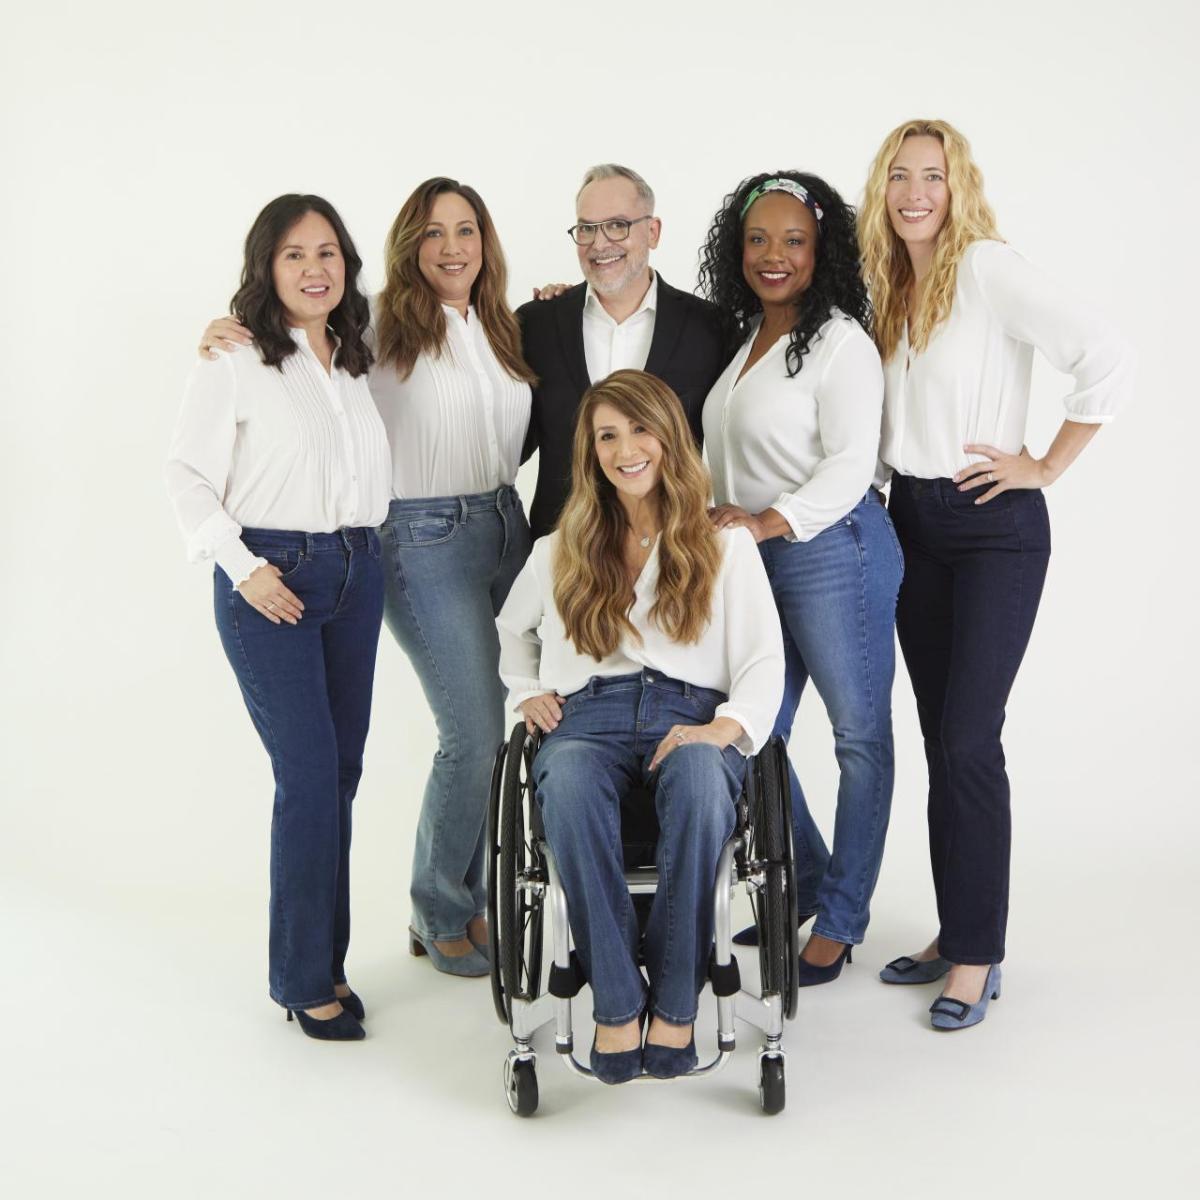 Five diverse models are showcasing NYDJ's Marilyn Straight Adapt-Denim™ jeans alongside Brand Ambassador Mark Peters. All models pose in various denim hues with white tops, while Mark, donning a white shirt and black sportscoat, stands among them. In the forefront, a wheelchair model poses elegantly.